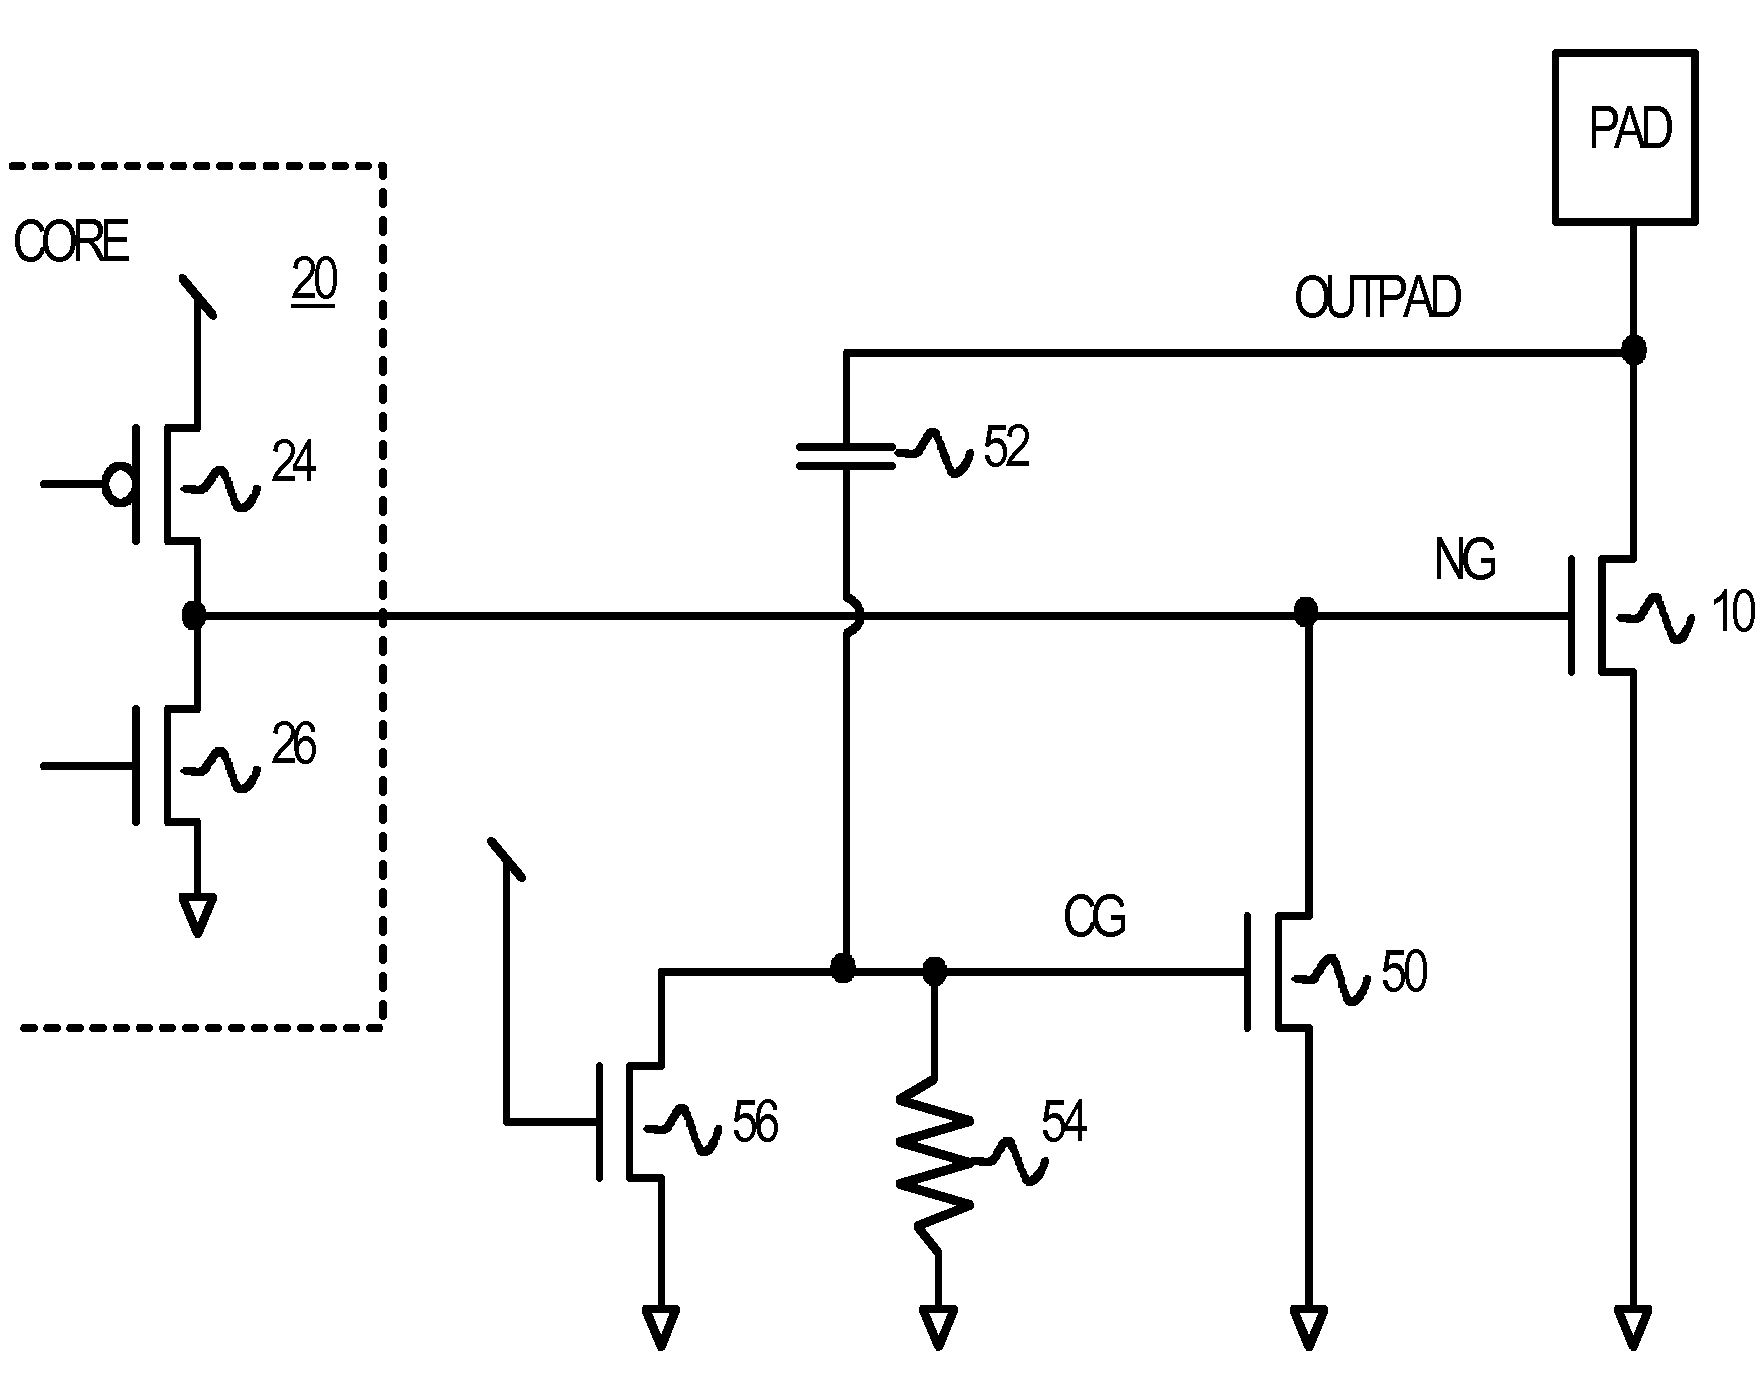 ESD Protection using a Capacitivly-Coupled Clamp for Protecting Low-Voltage Core Transistors from High-Voltage Outputs